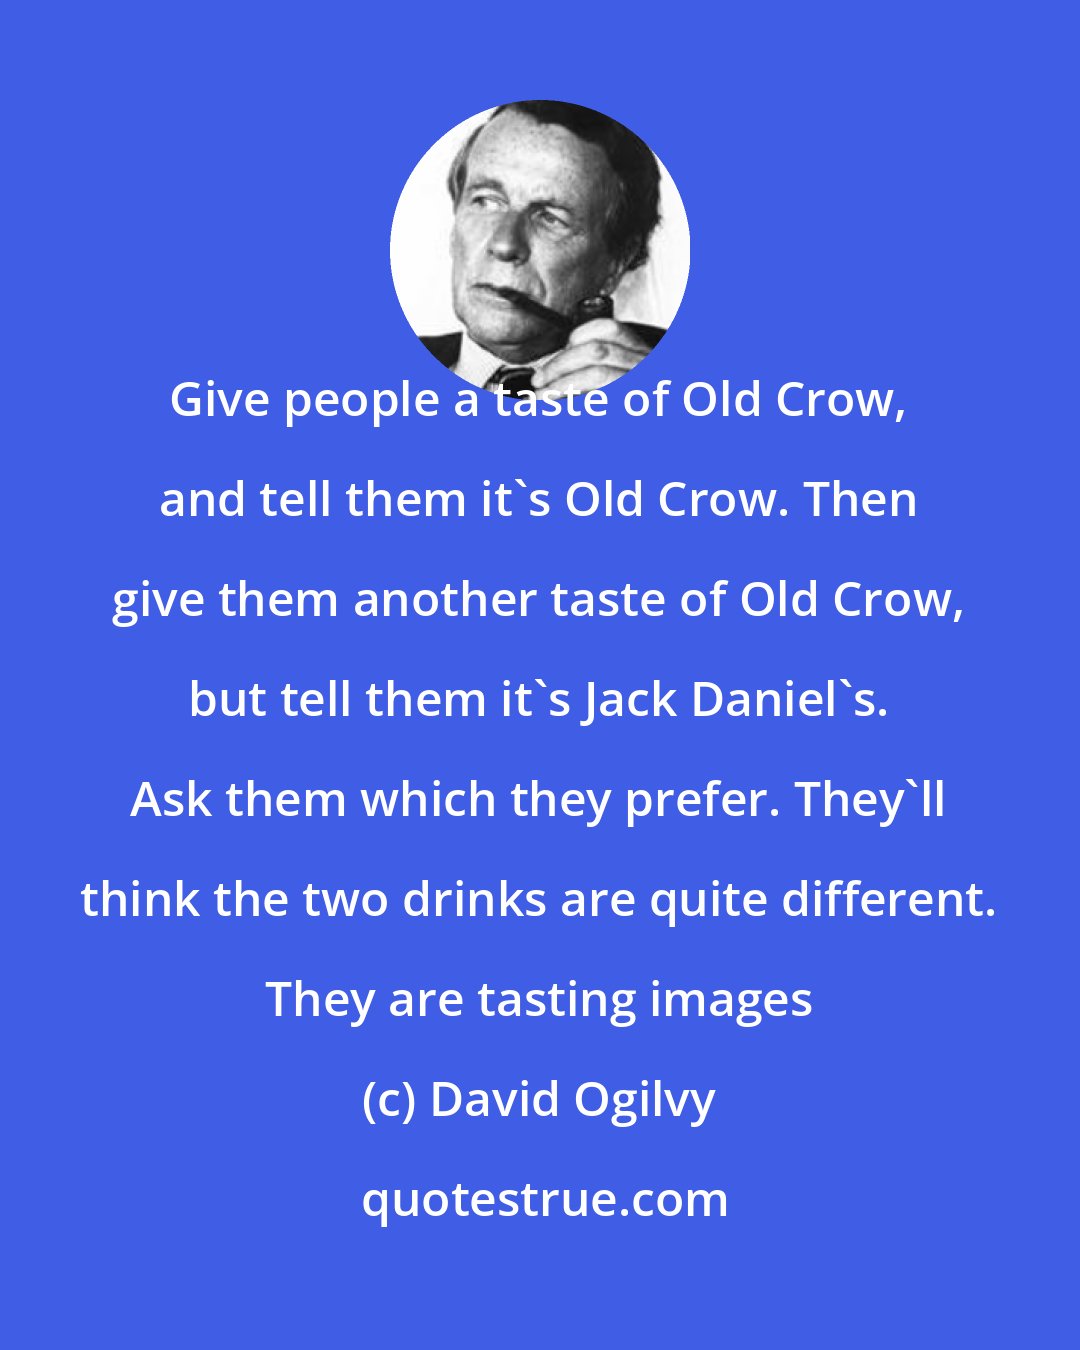 David Ogilvy: Give people a taste of Old Crow, and tell them it's Old Crow. Then give them another taste of Old Crow, but tell them it's Jack Daniel's. Ask them which they prefer. They'll think the two drinks are quite different. They are tasting images